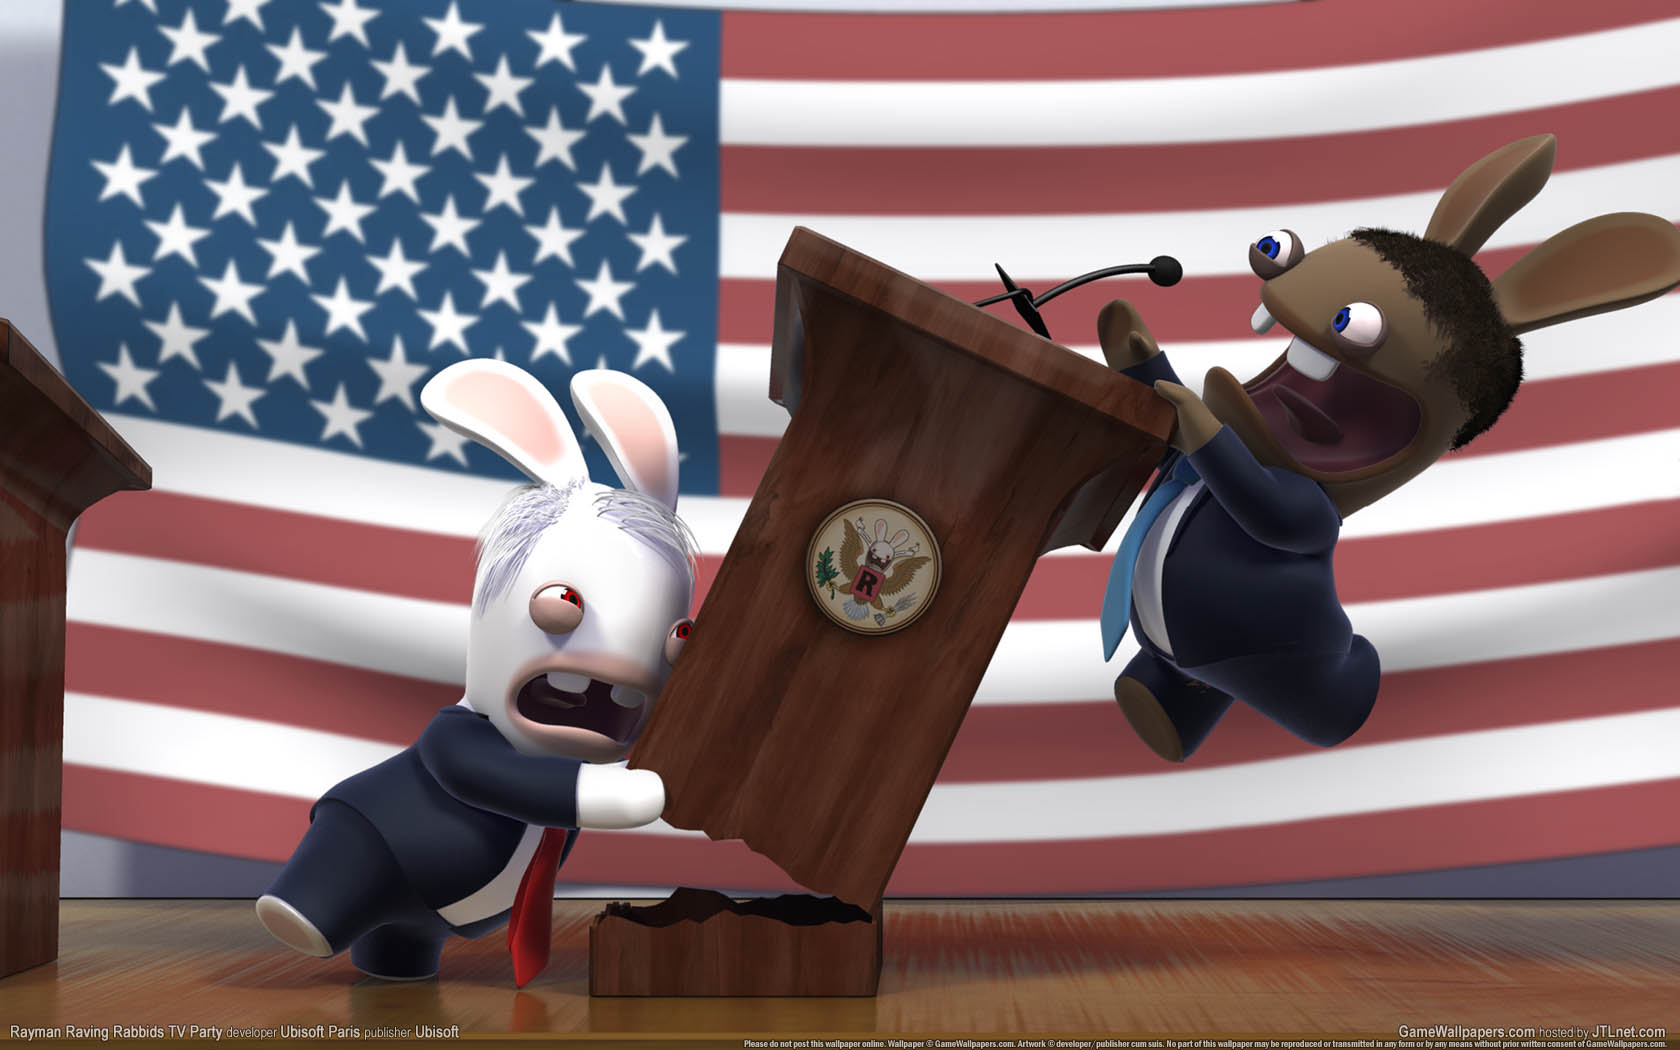 Rayman Raving Rabbids TV Party achtergrond 07 1680x1050